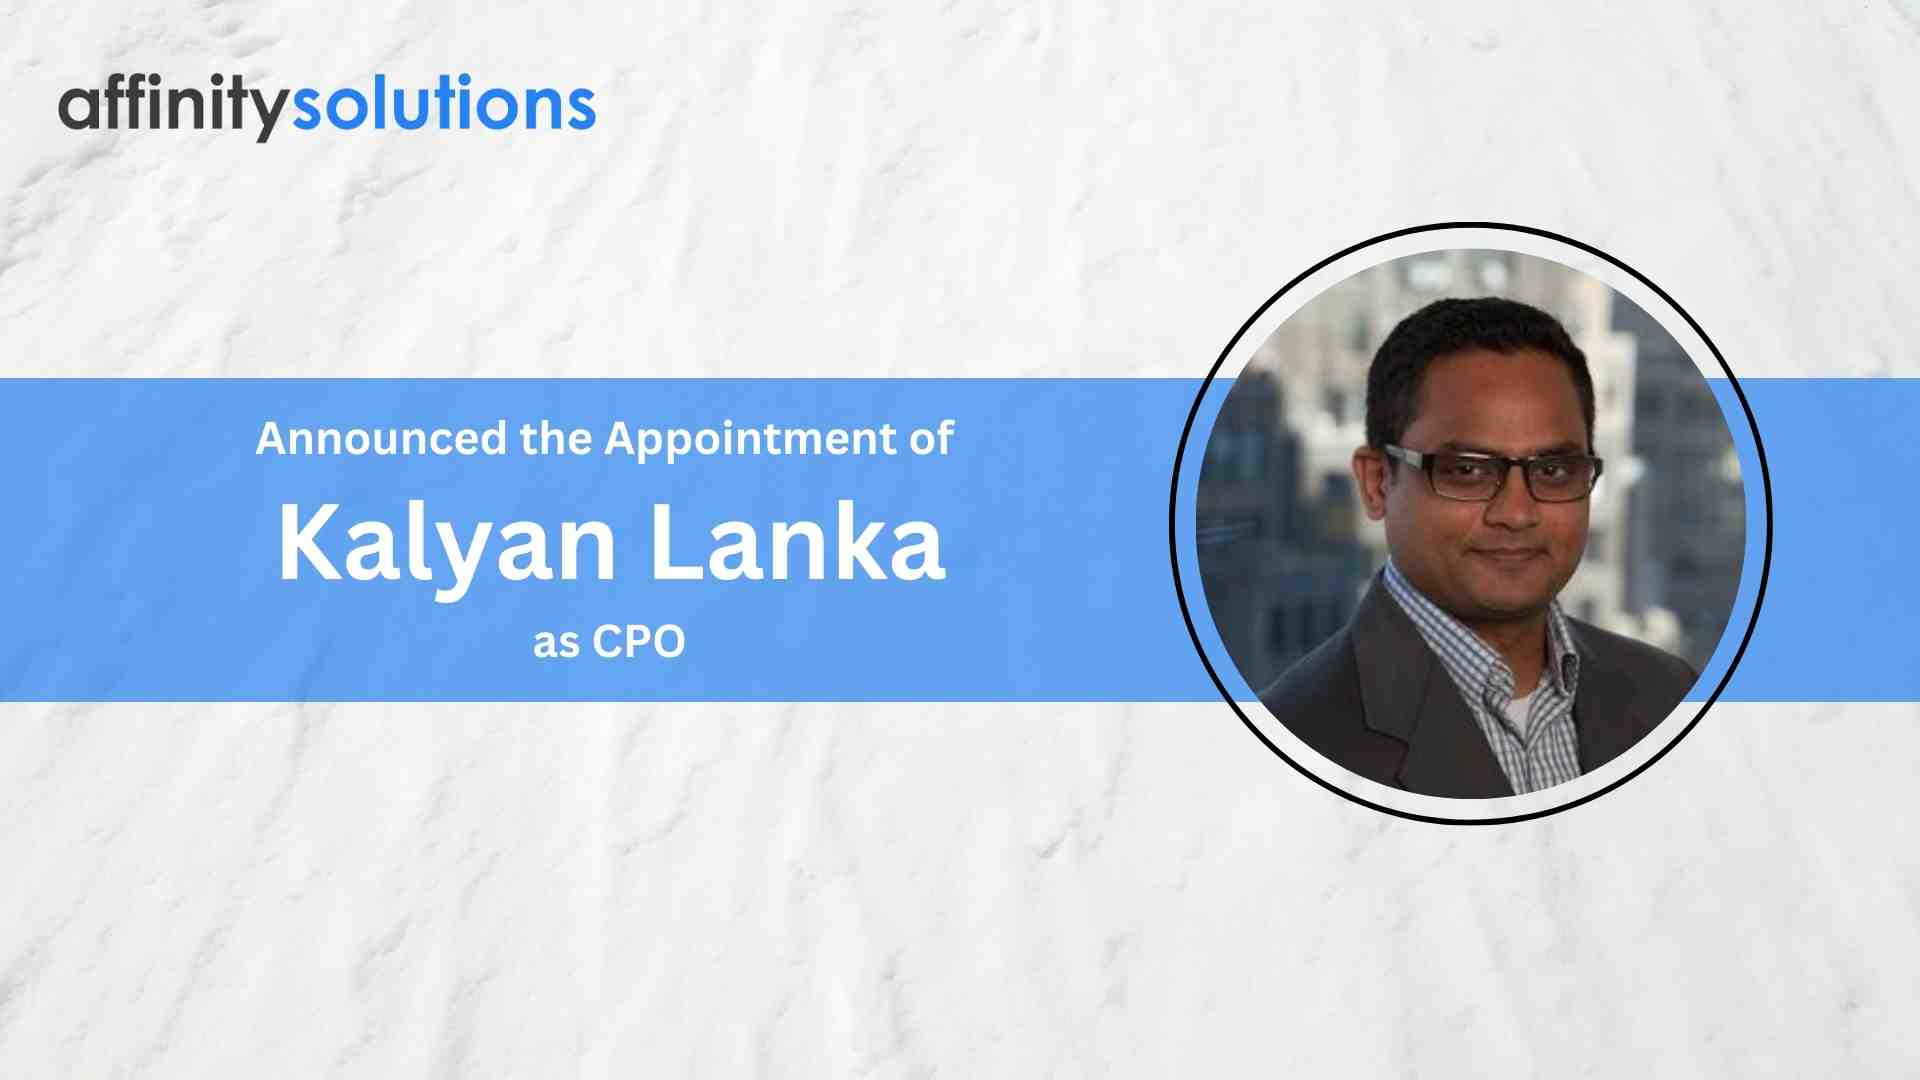 Affinity Solutions Bolsters Leadership Team With Kalyan Lanka as Chief Product Officer